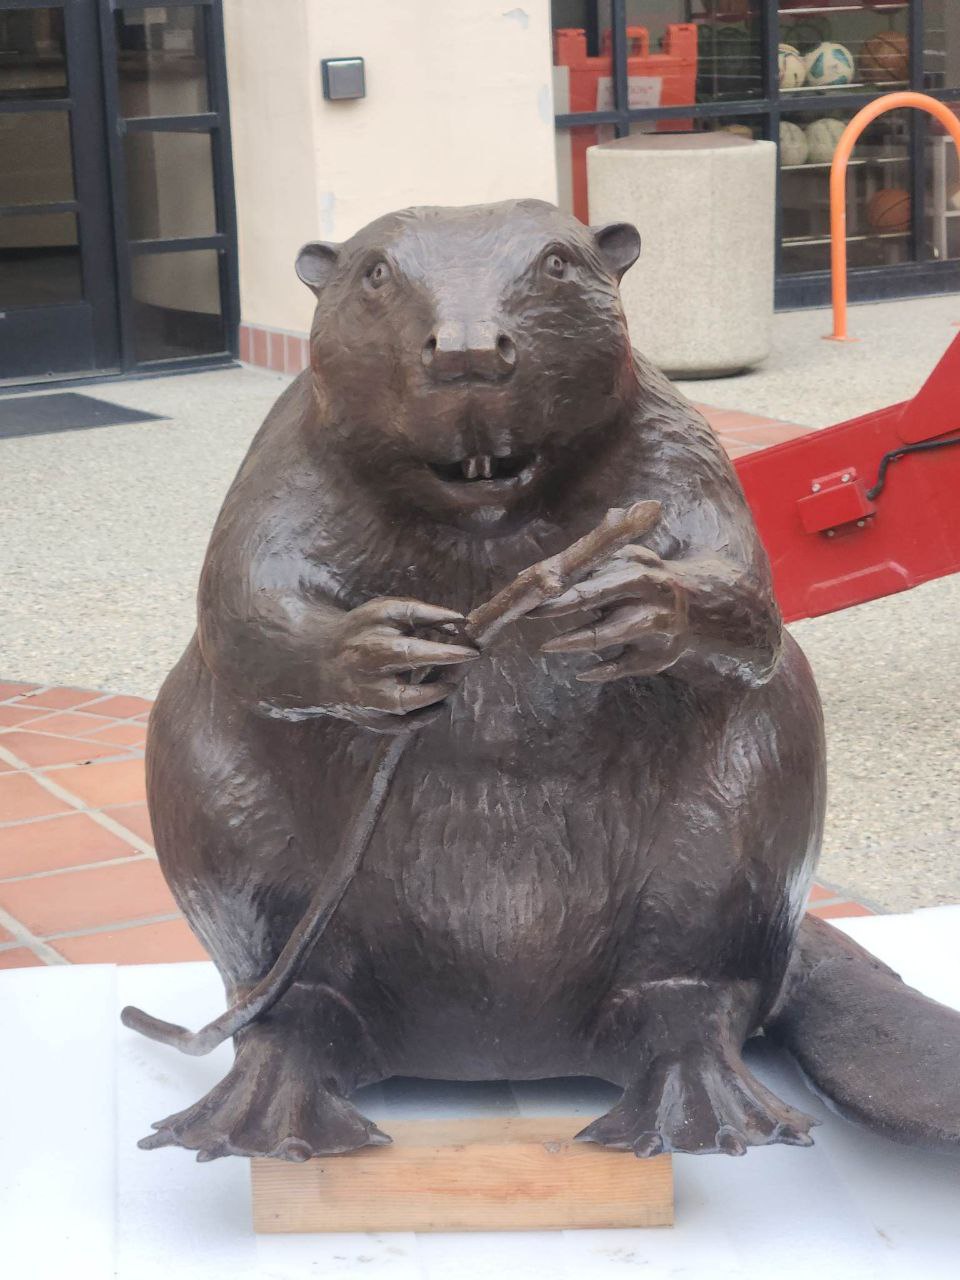 So We Have A Beaver Statue Now.